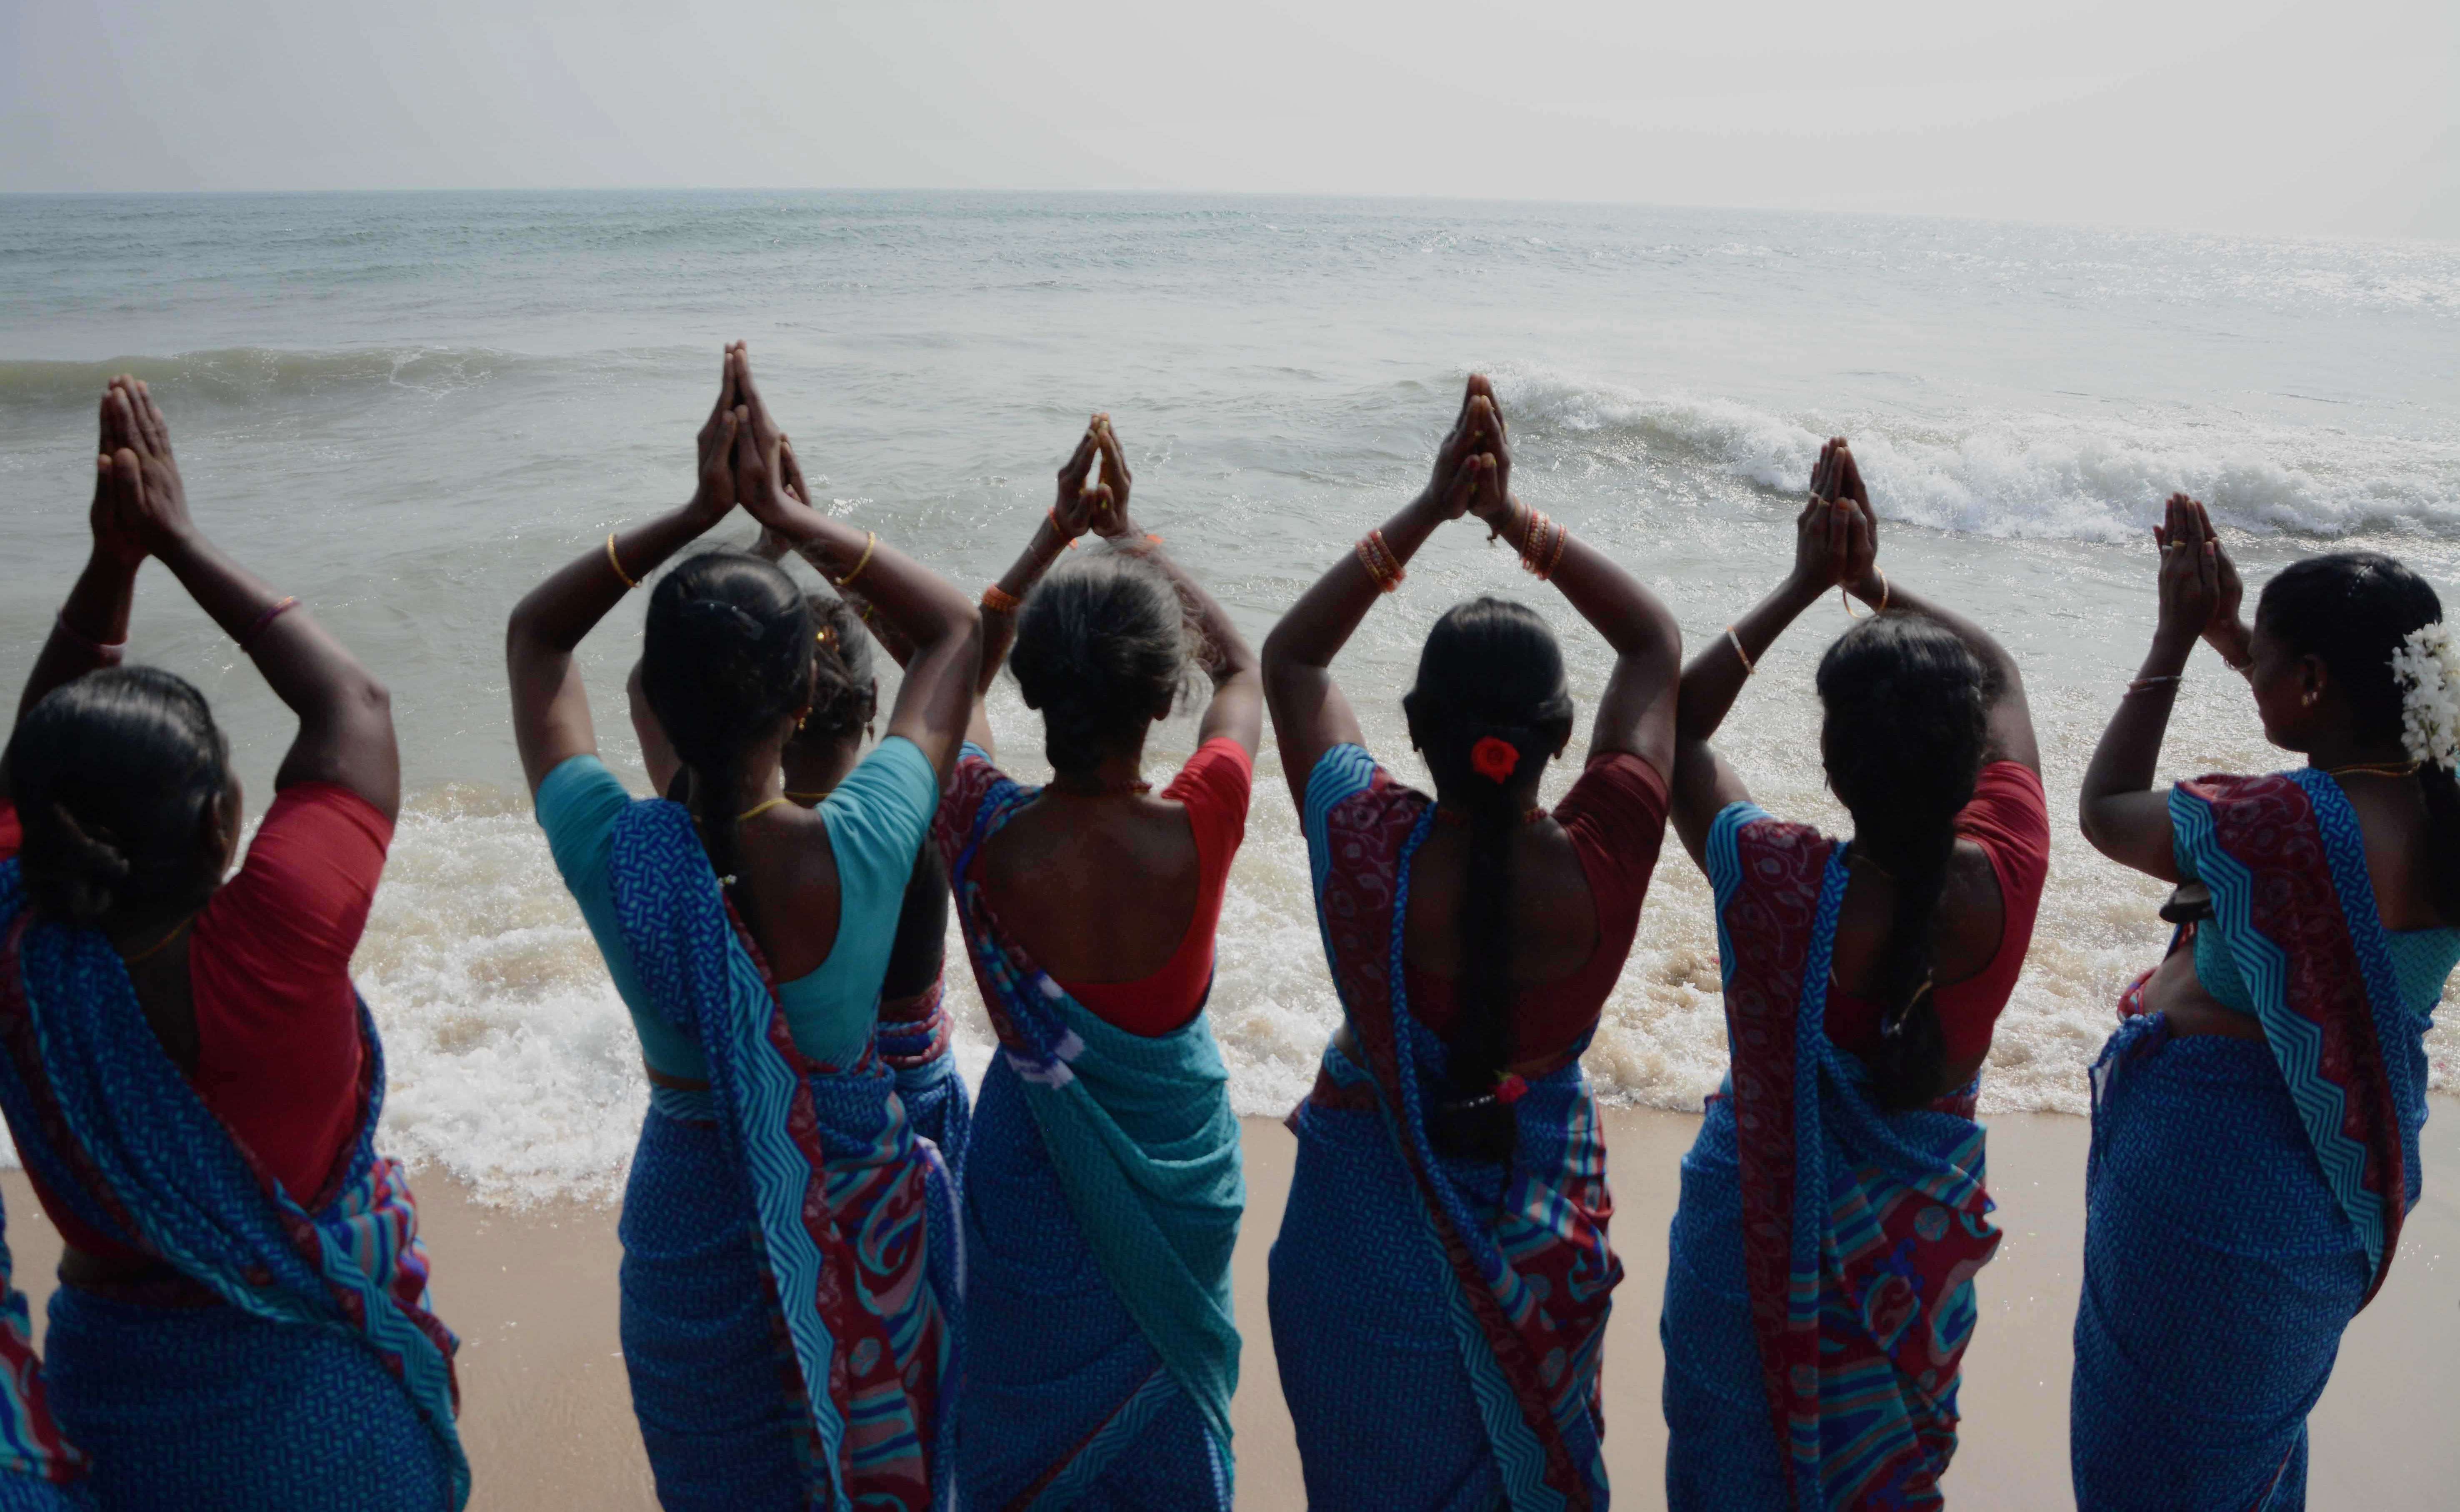 Indian women offer prayers during a ceremony for the victims of the 2004 earthquake and tsunami at Marina Beach in Chennai on december 26, 2015. The earthquake and tsunami which struck the Indian Ocean on December 26, 2004 killed over 230,000 people and devastated coastal communities. AFP PHOTO / STR